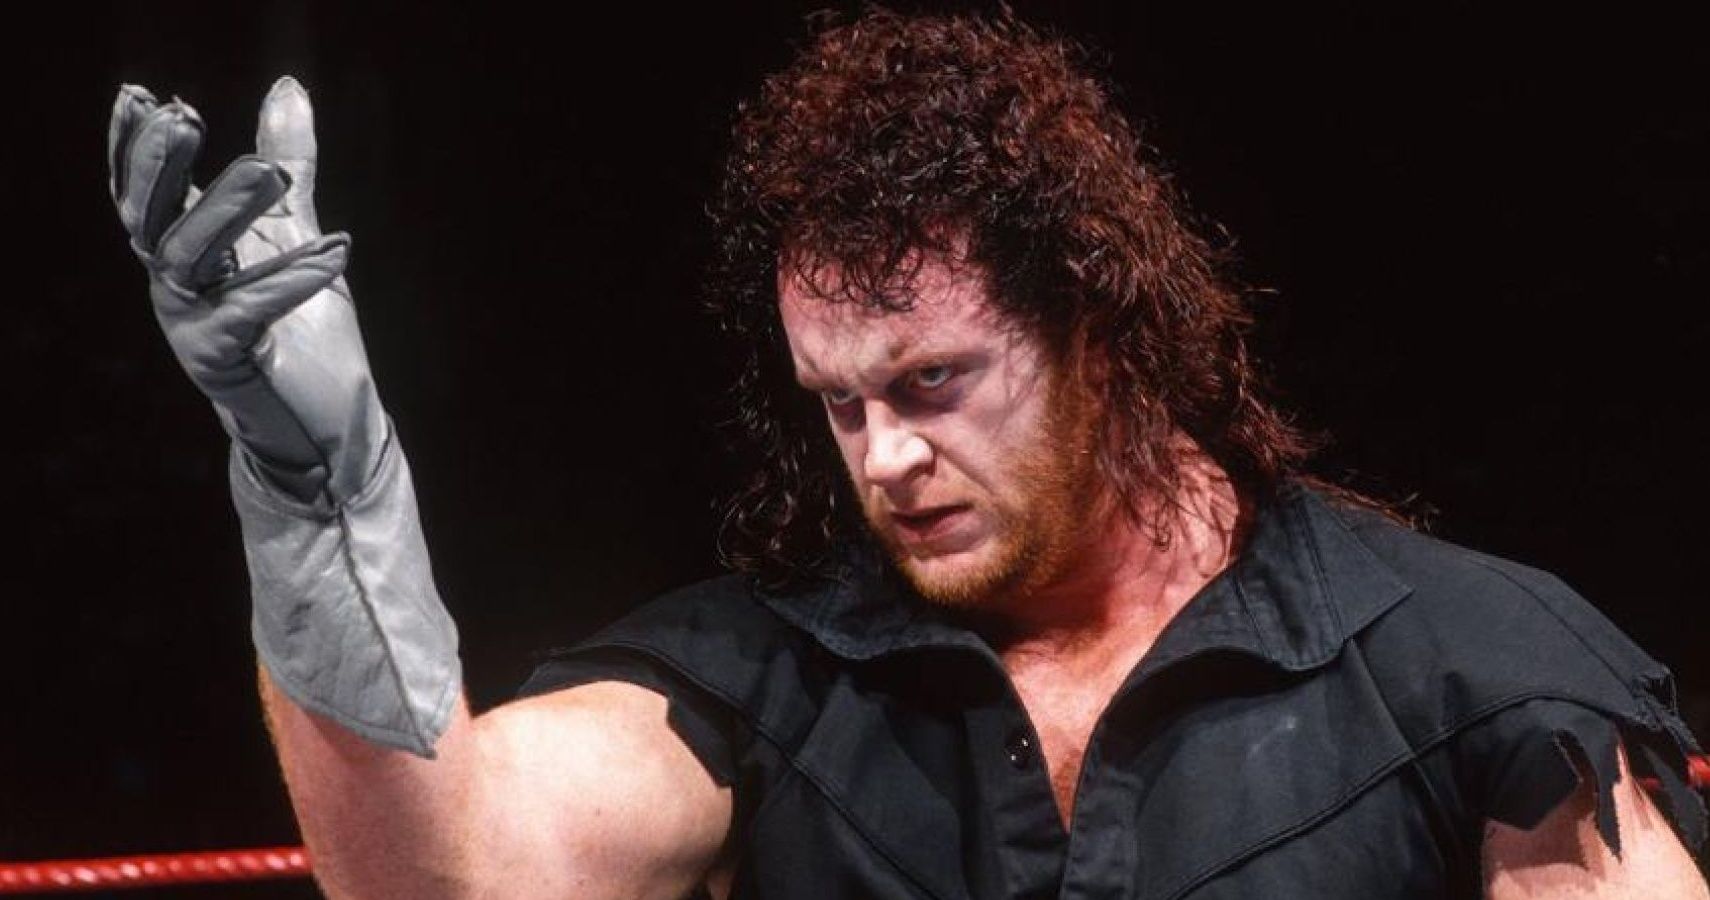 10 Worst Moments From The Undertaker’s WWE Career